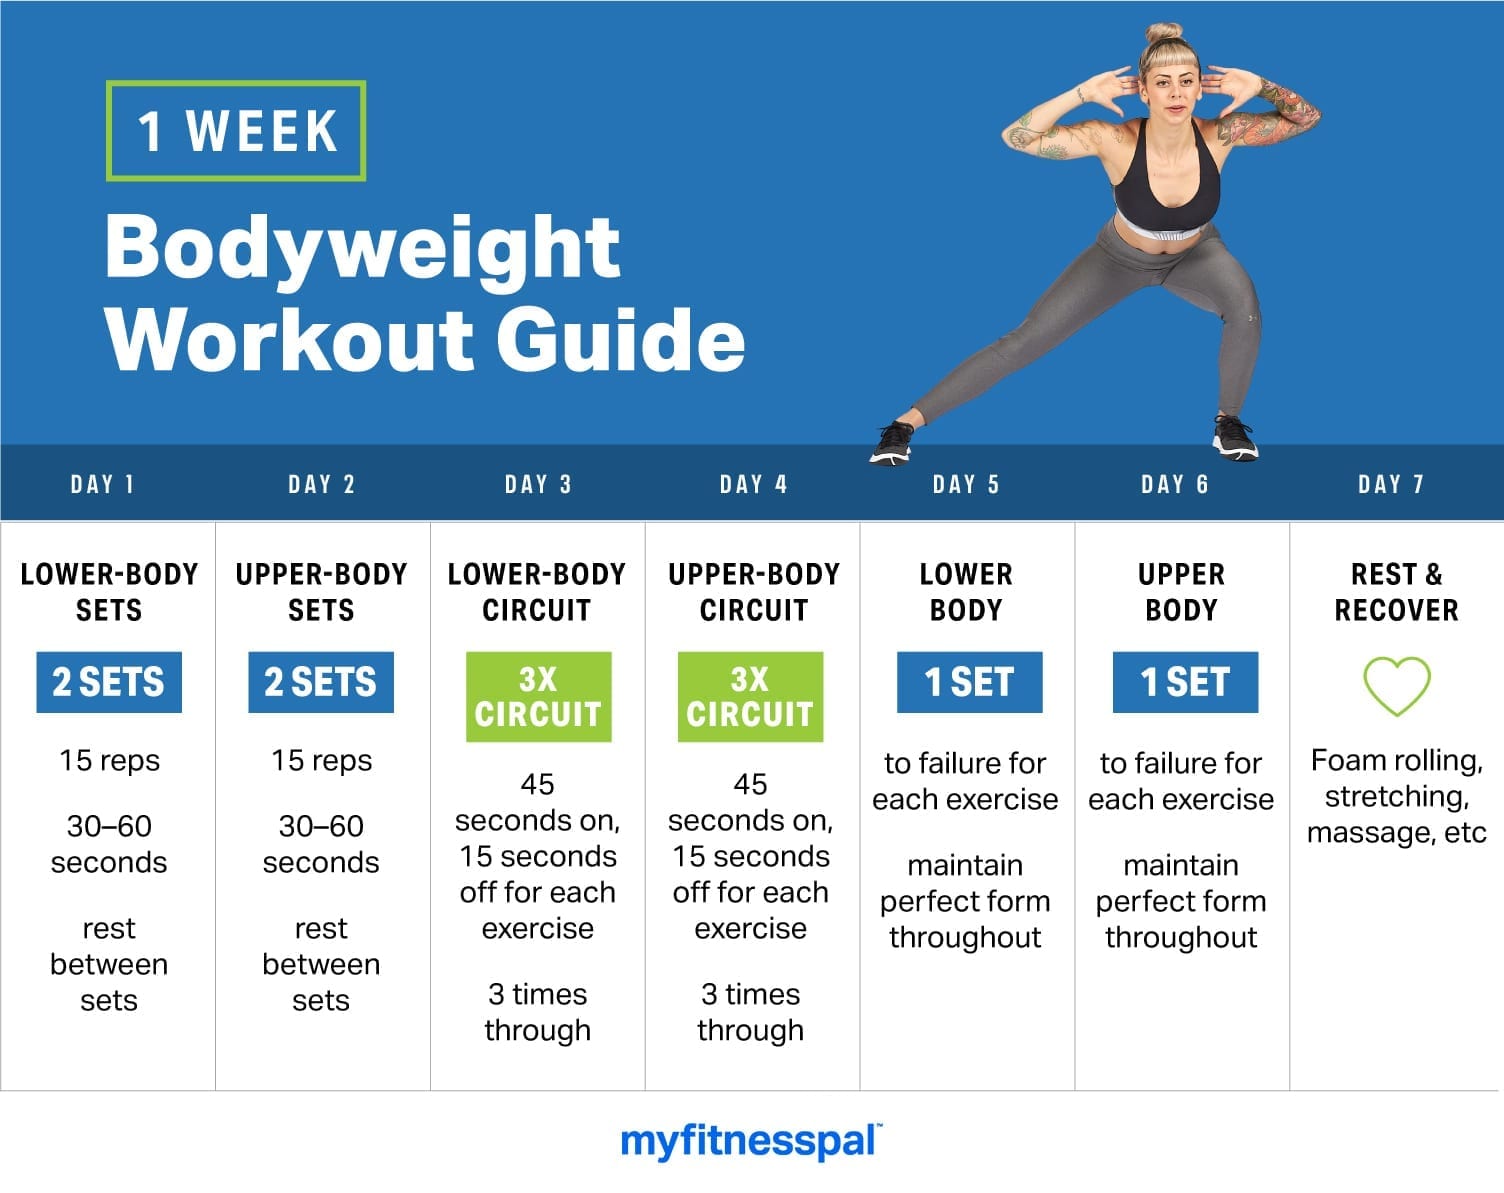 Bodyweight Exercises: The Ultimate Home Workout Guide